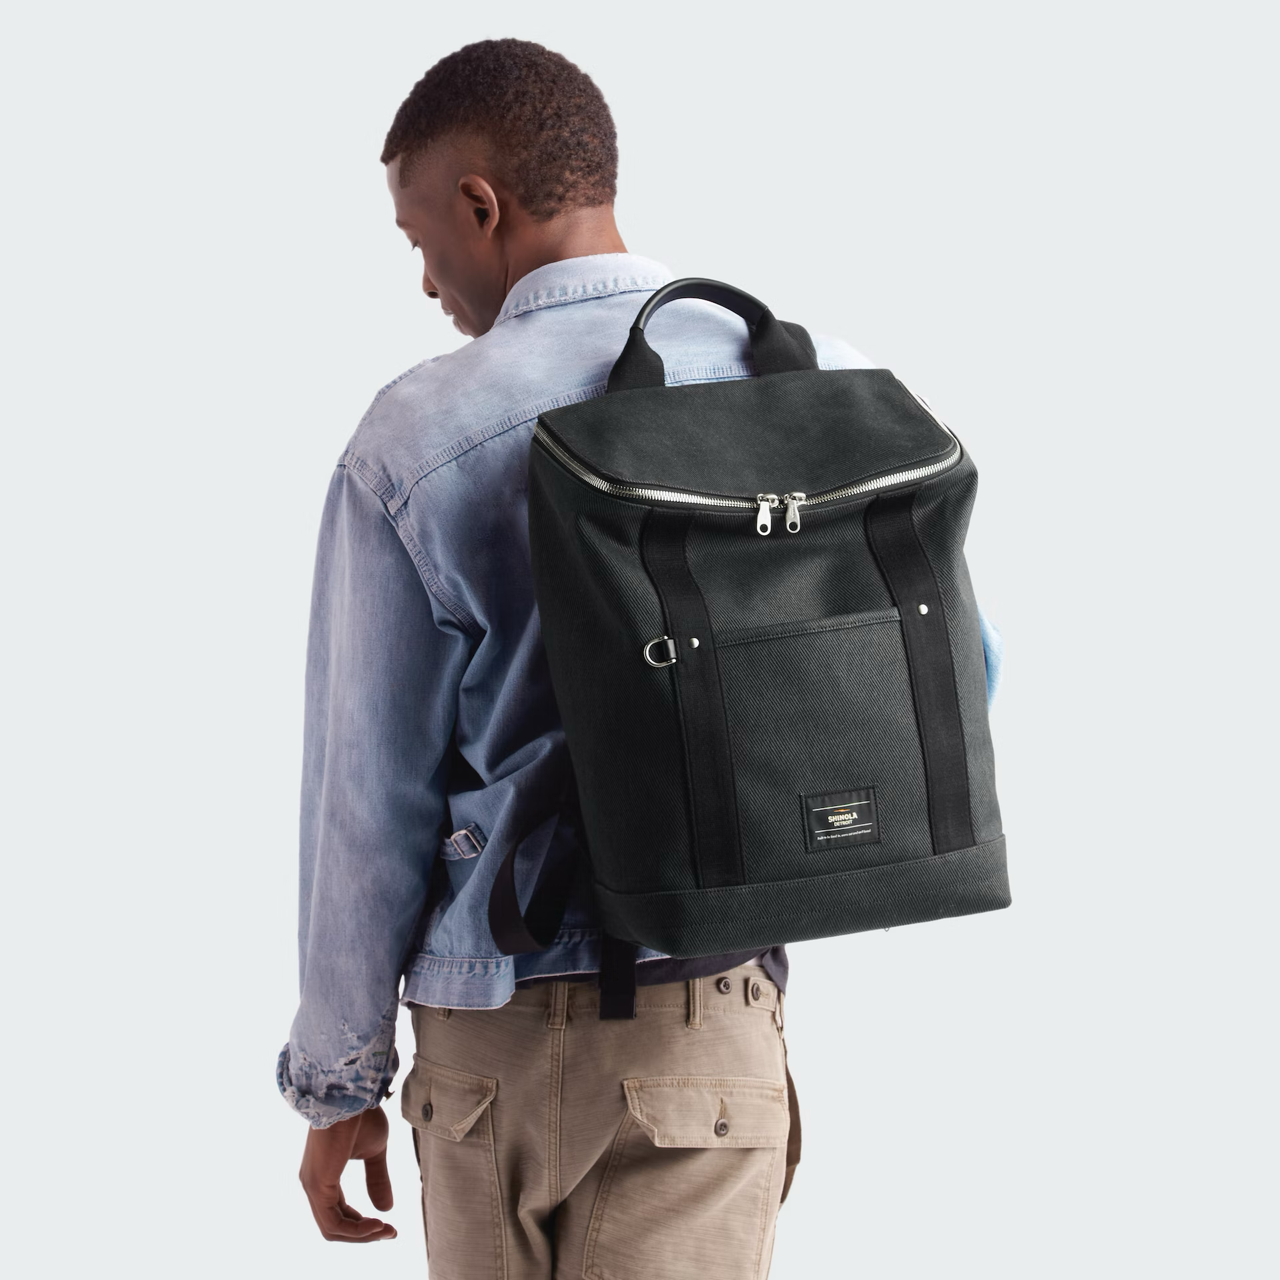 Canvas laptop backpack for work and travel that stands up